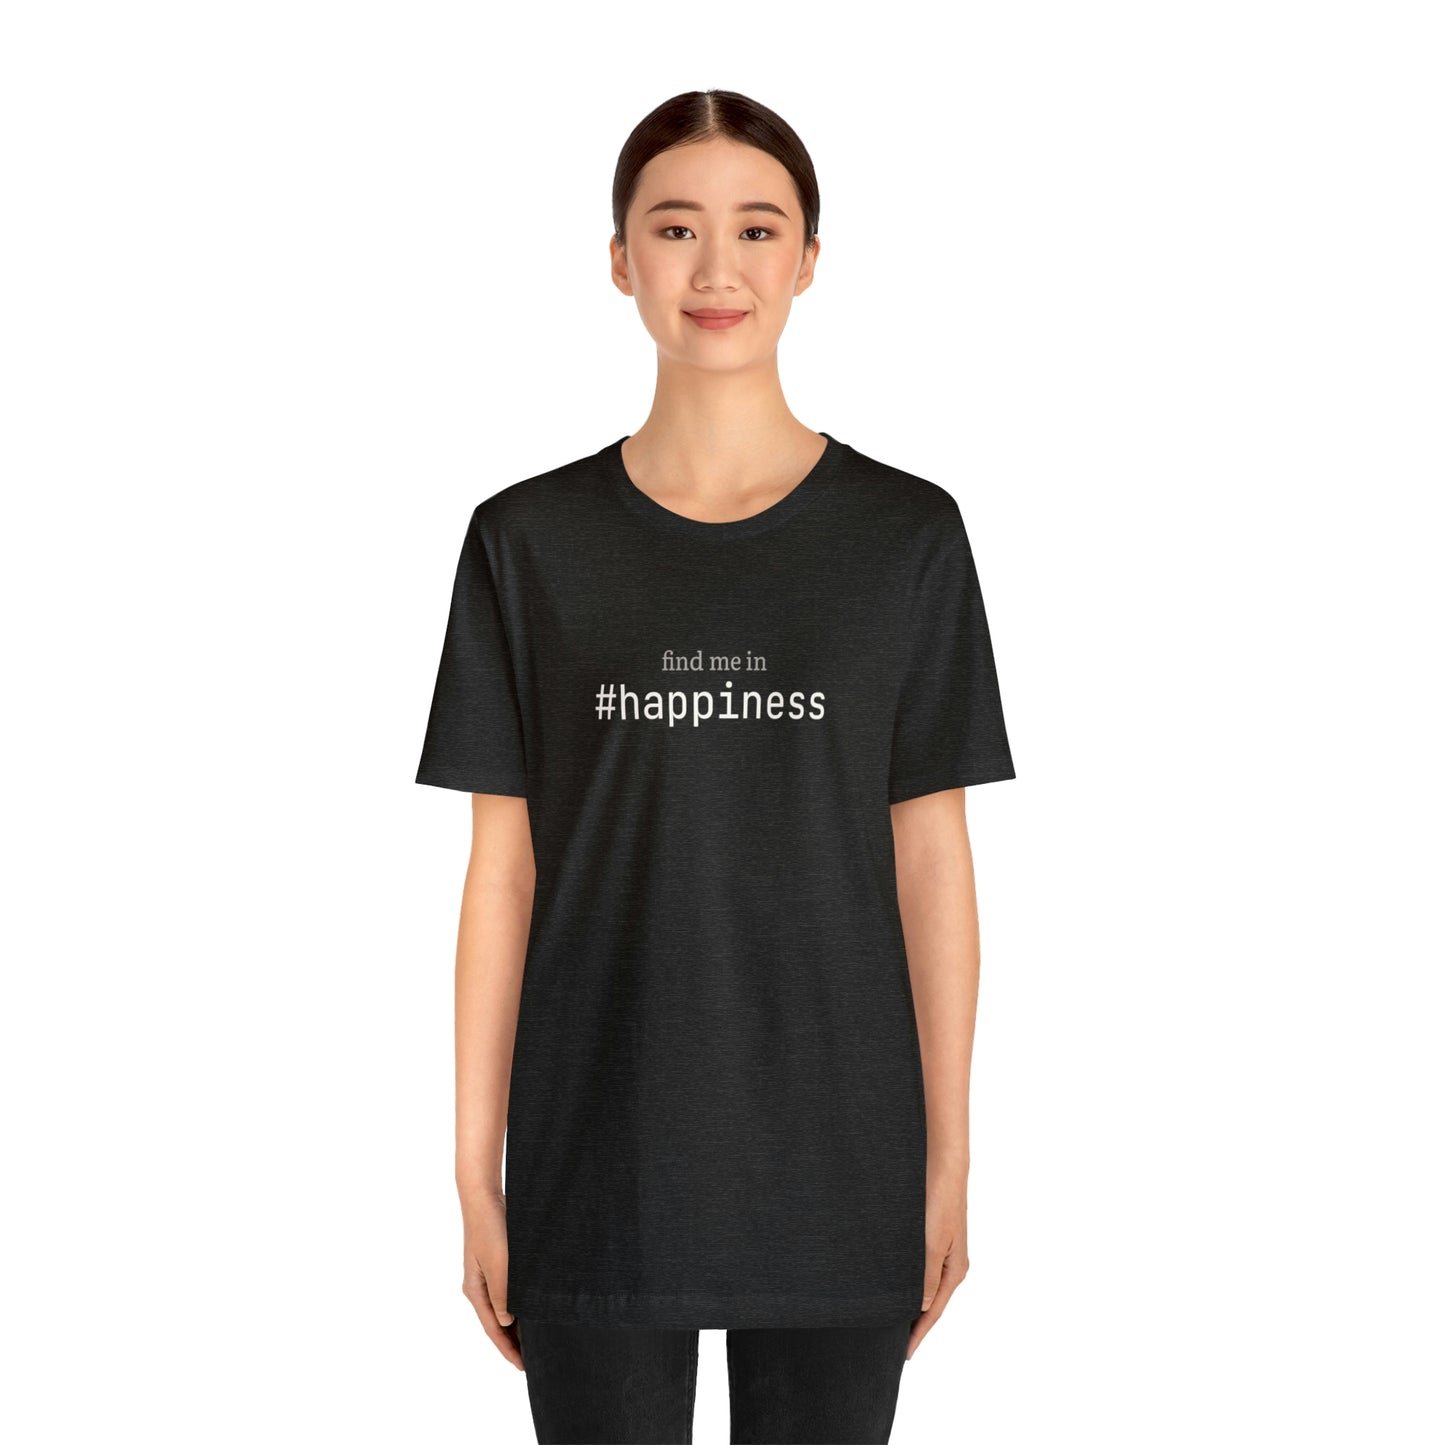 Find me in #happiness T-Shirt